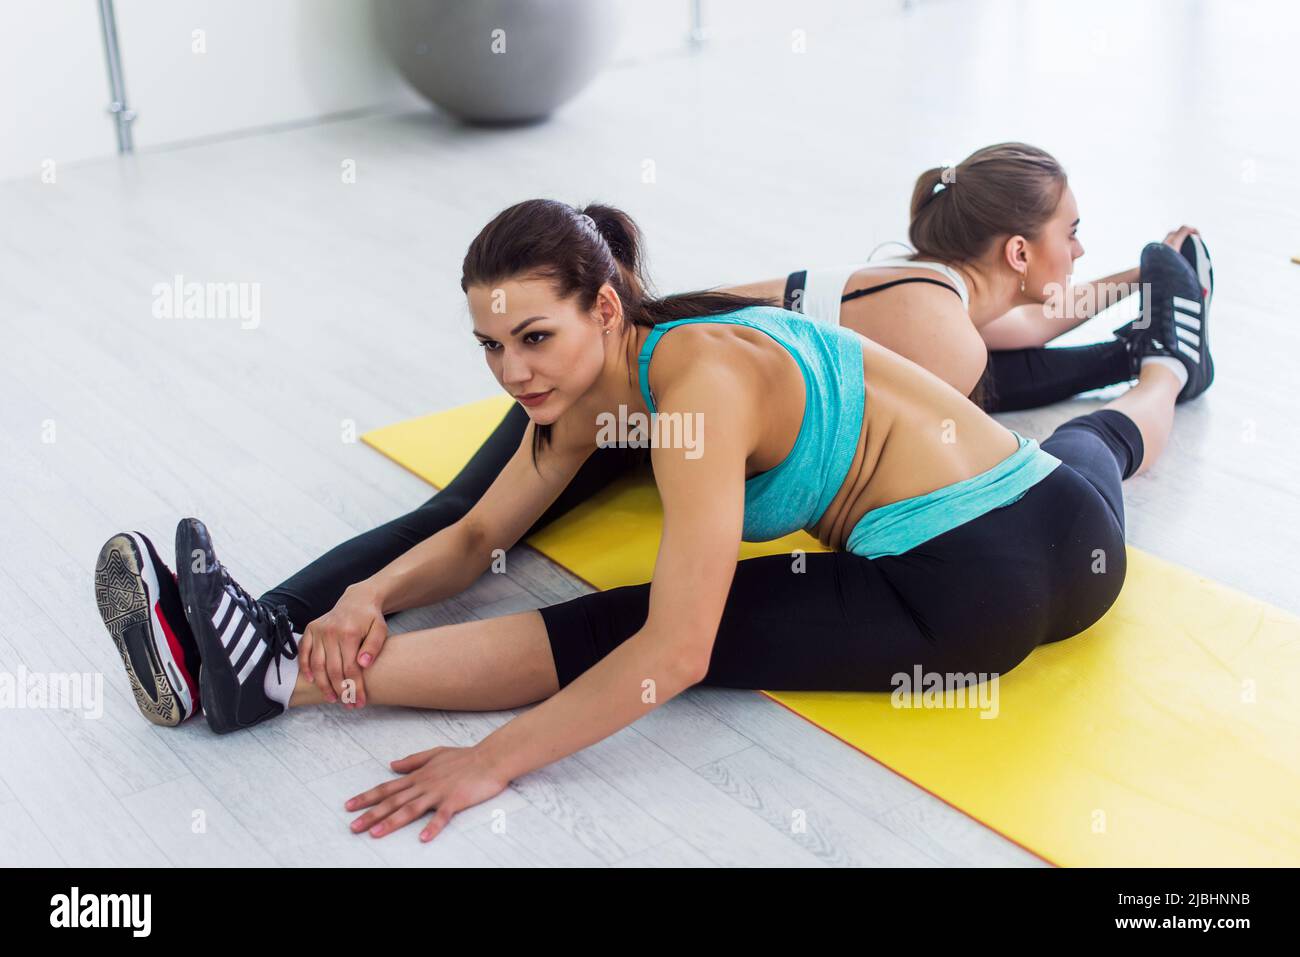 Two slim girls taking part in yoga class working in pair doing